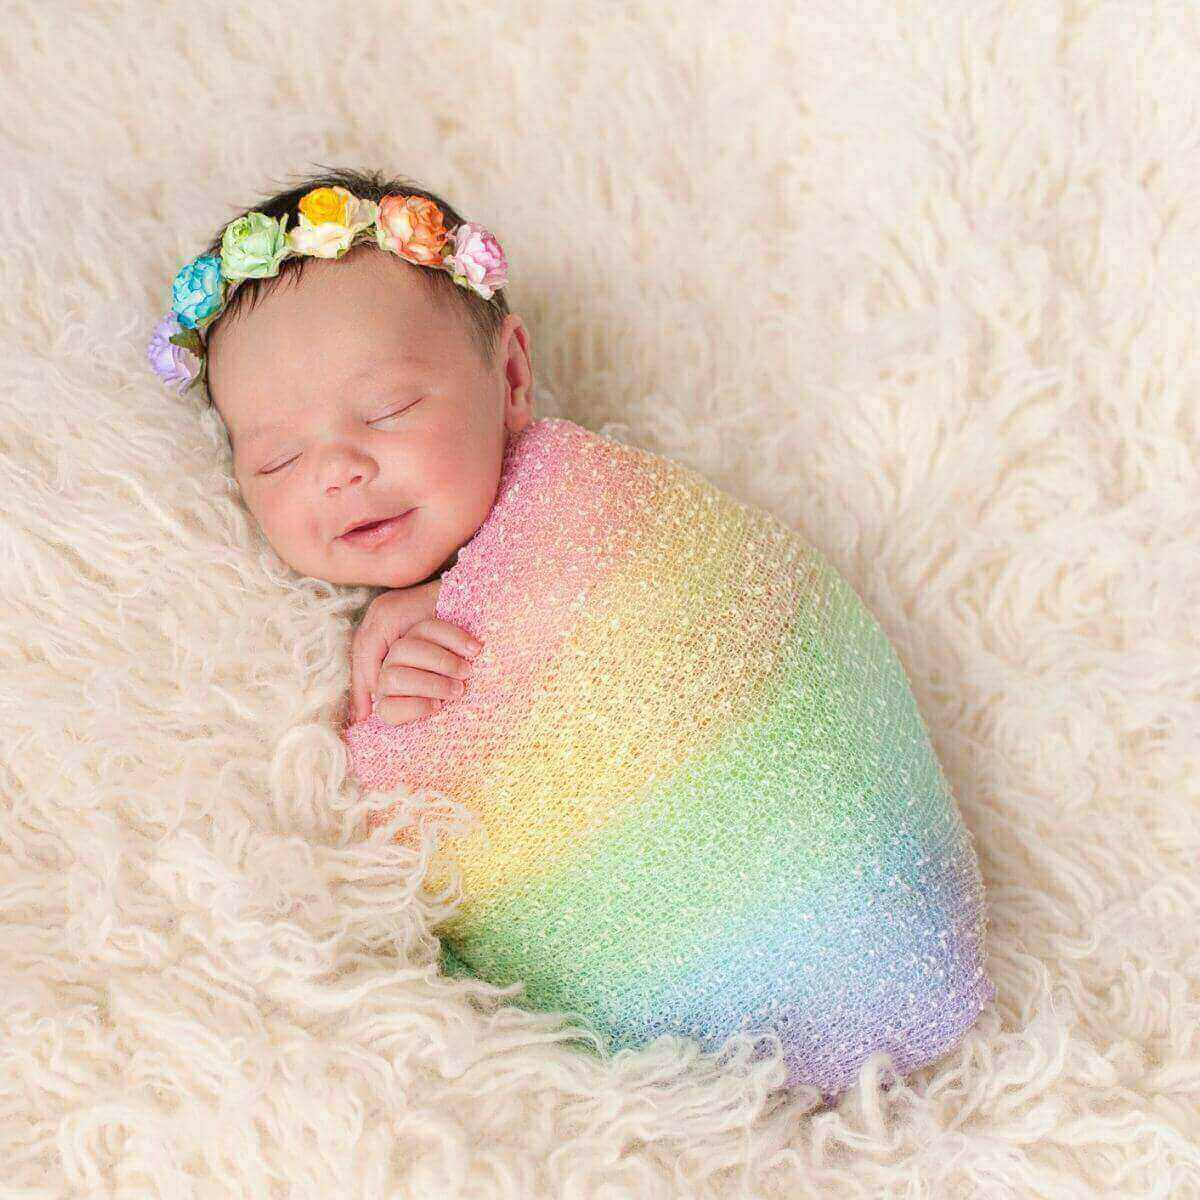 Newborn girl wearing a headband with purple,blue,green,yellow, and orange roses, wrapped in a pink,yellow,green,blue, and purple striped blanket laying on a white shag carpet.